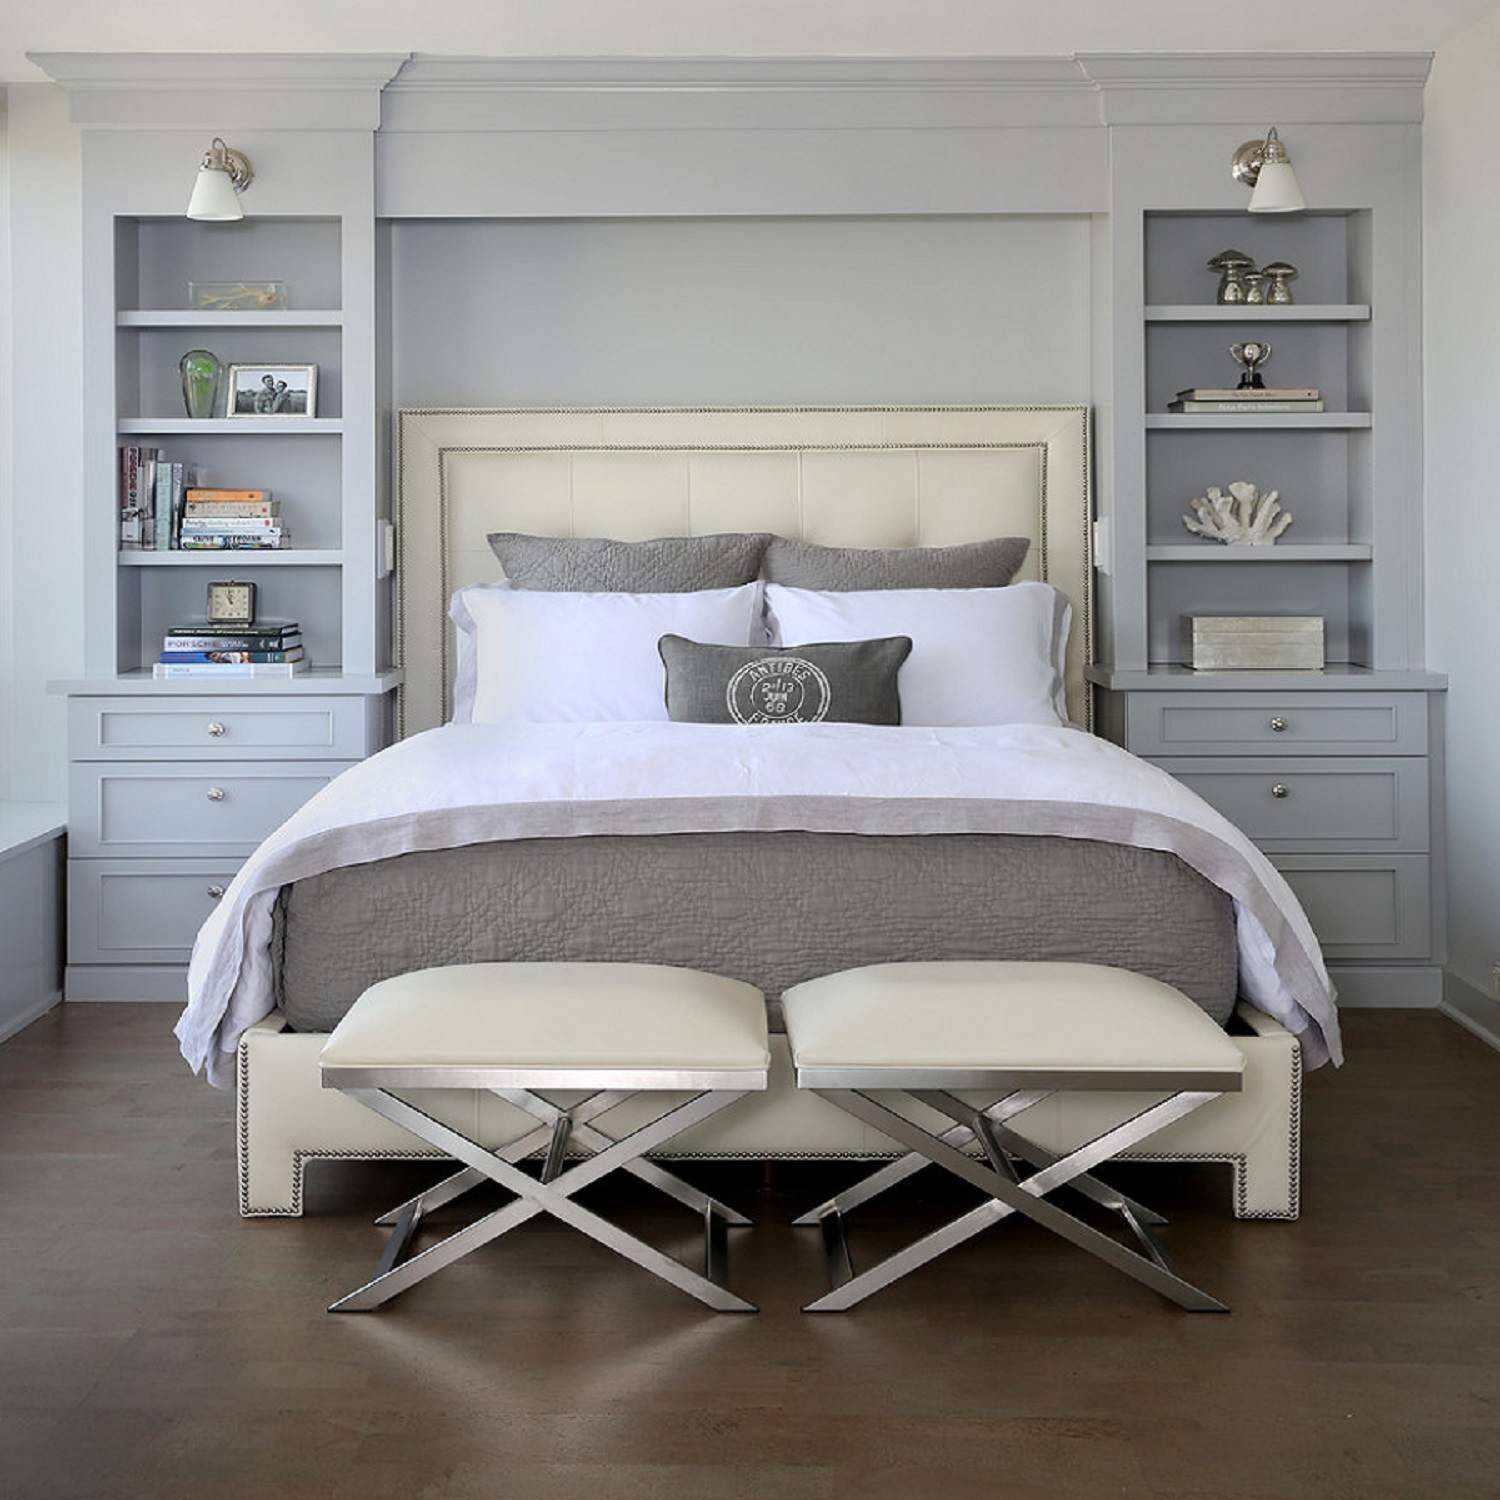 Maximize Space In Small Bedroom
 How to Maximize Space In A Small Bedroom My Tech Your Web